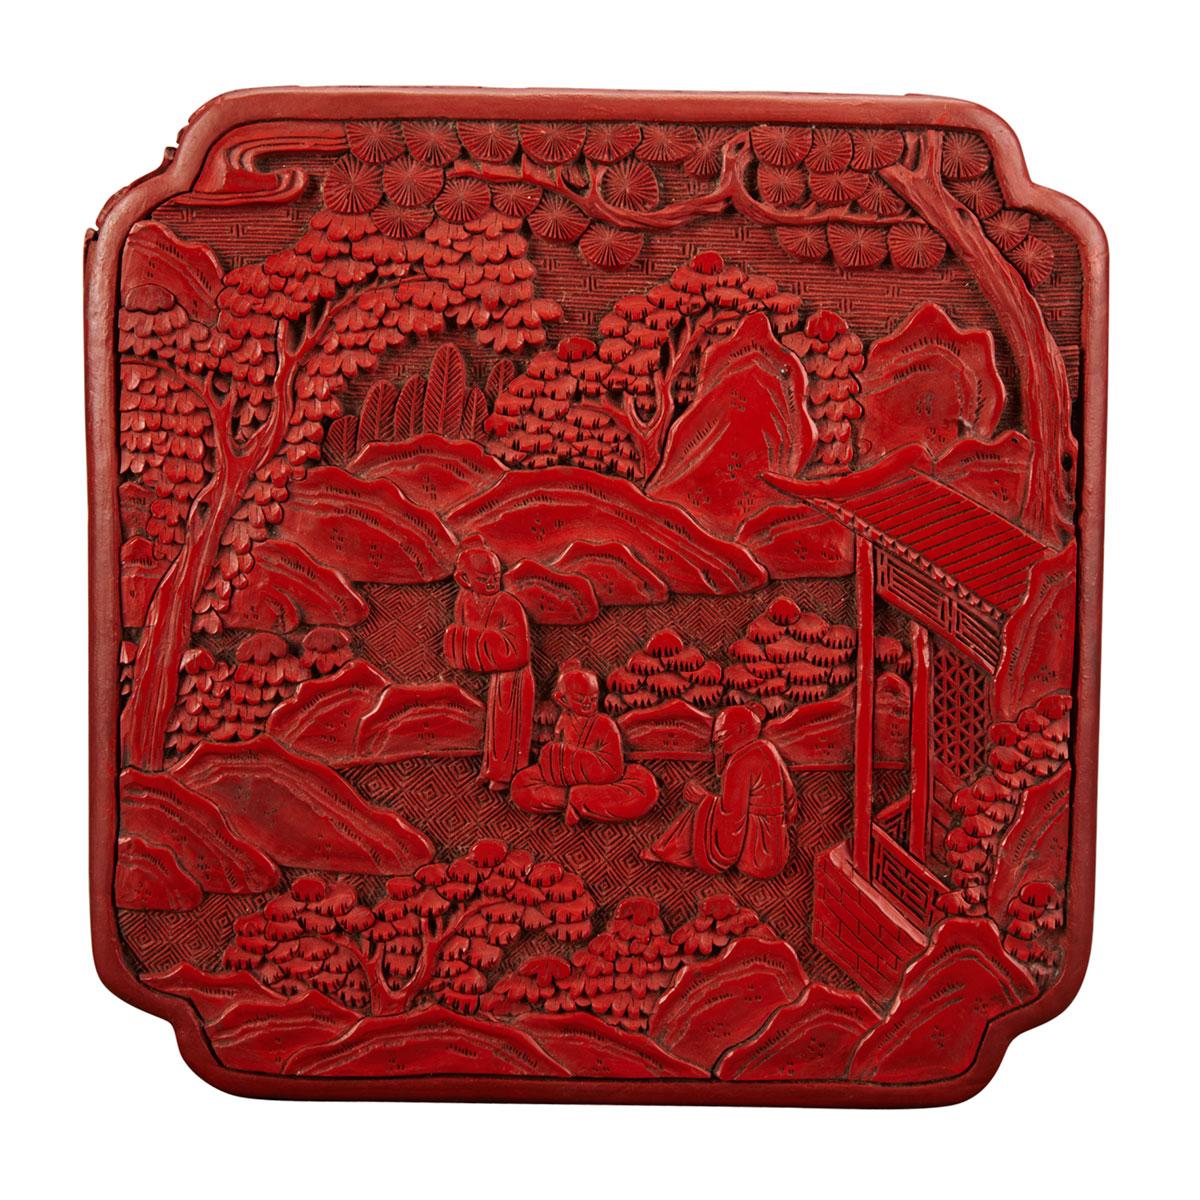 Cinnabar Box and Cover, Late Qing Dynasty